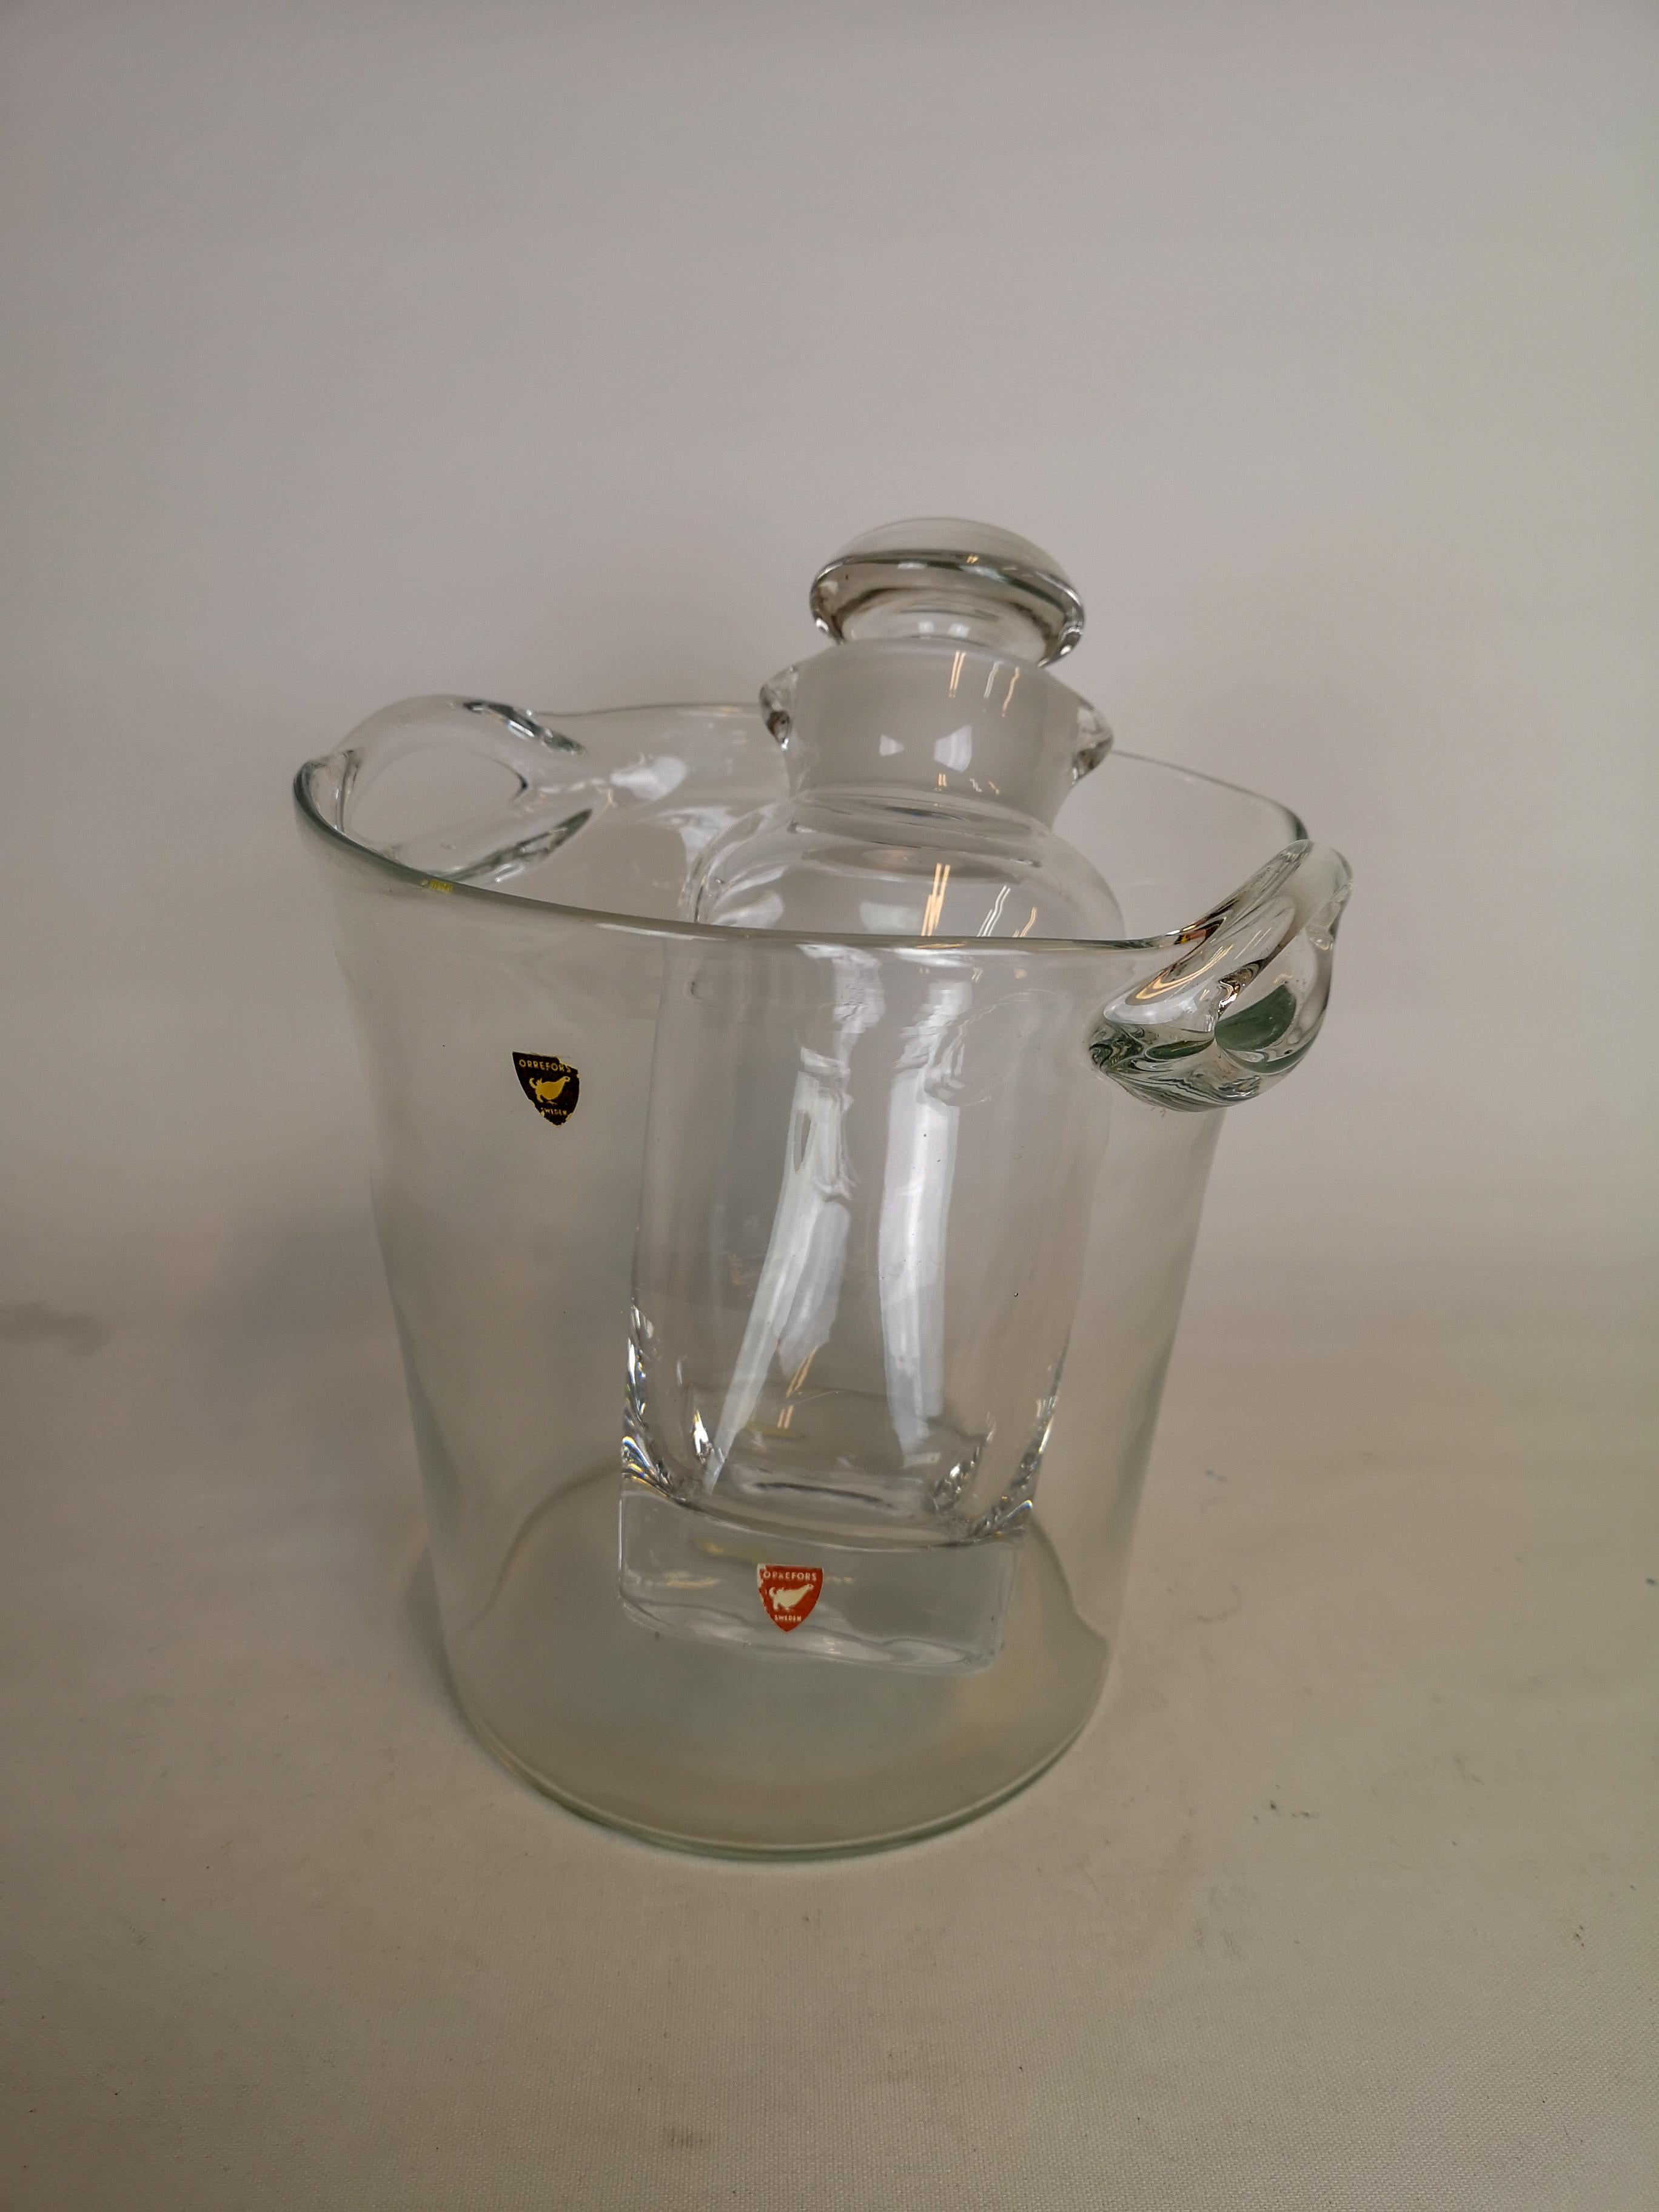 This set contains a glass bucket for ice or vine cooler. The other piece is a Shaker/carafe for spirits/whiskey. They are both designed by Nils Landberg and manufactured at Orrefors in the 1950s.

Good condition

Measures: Bucket H 19 cm D 20 cm